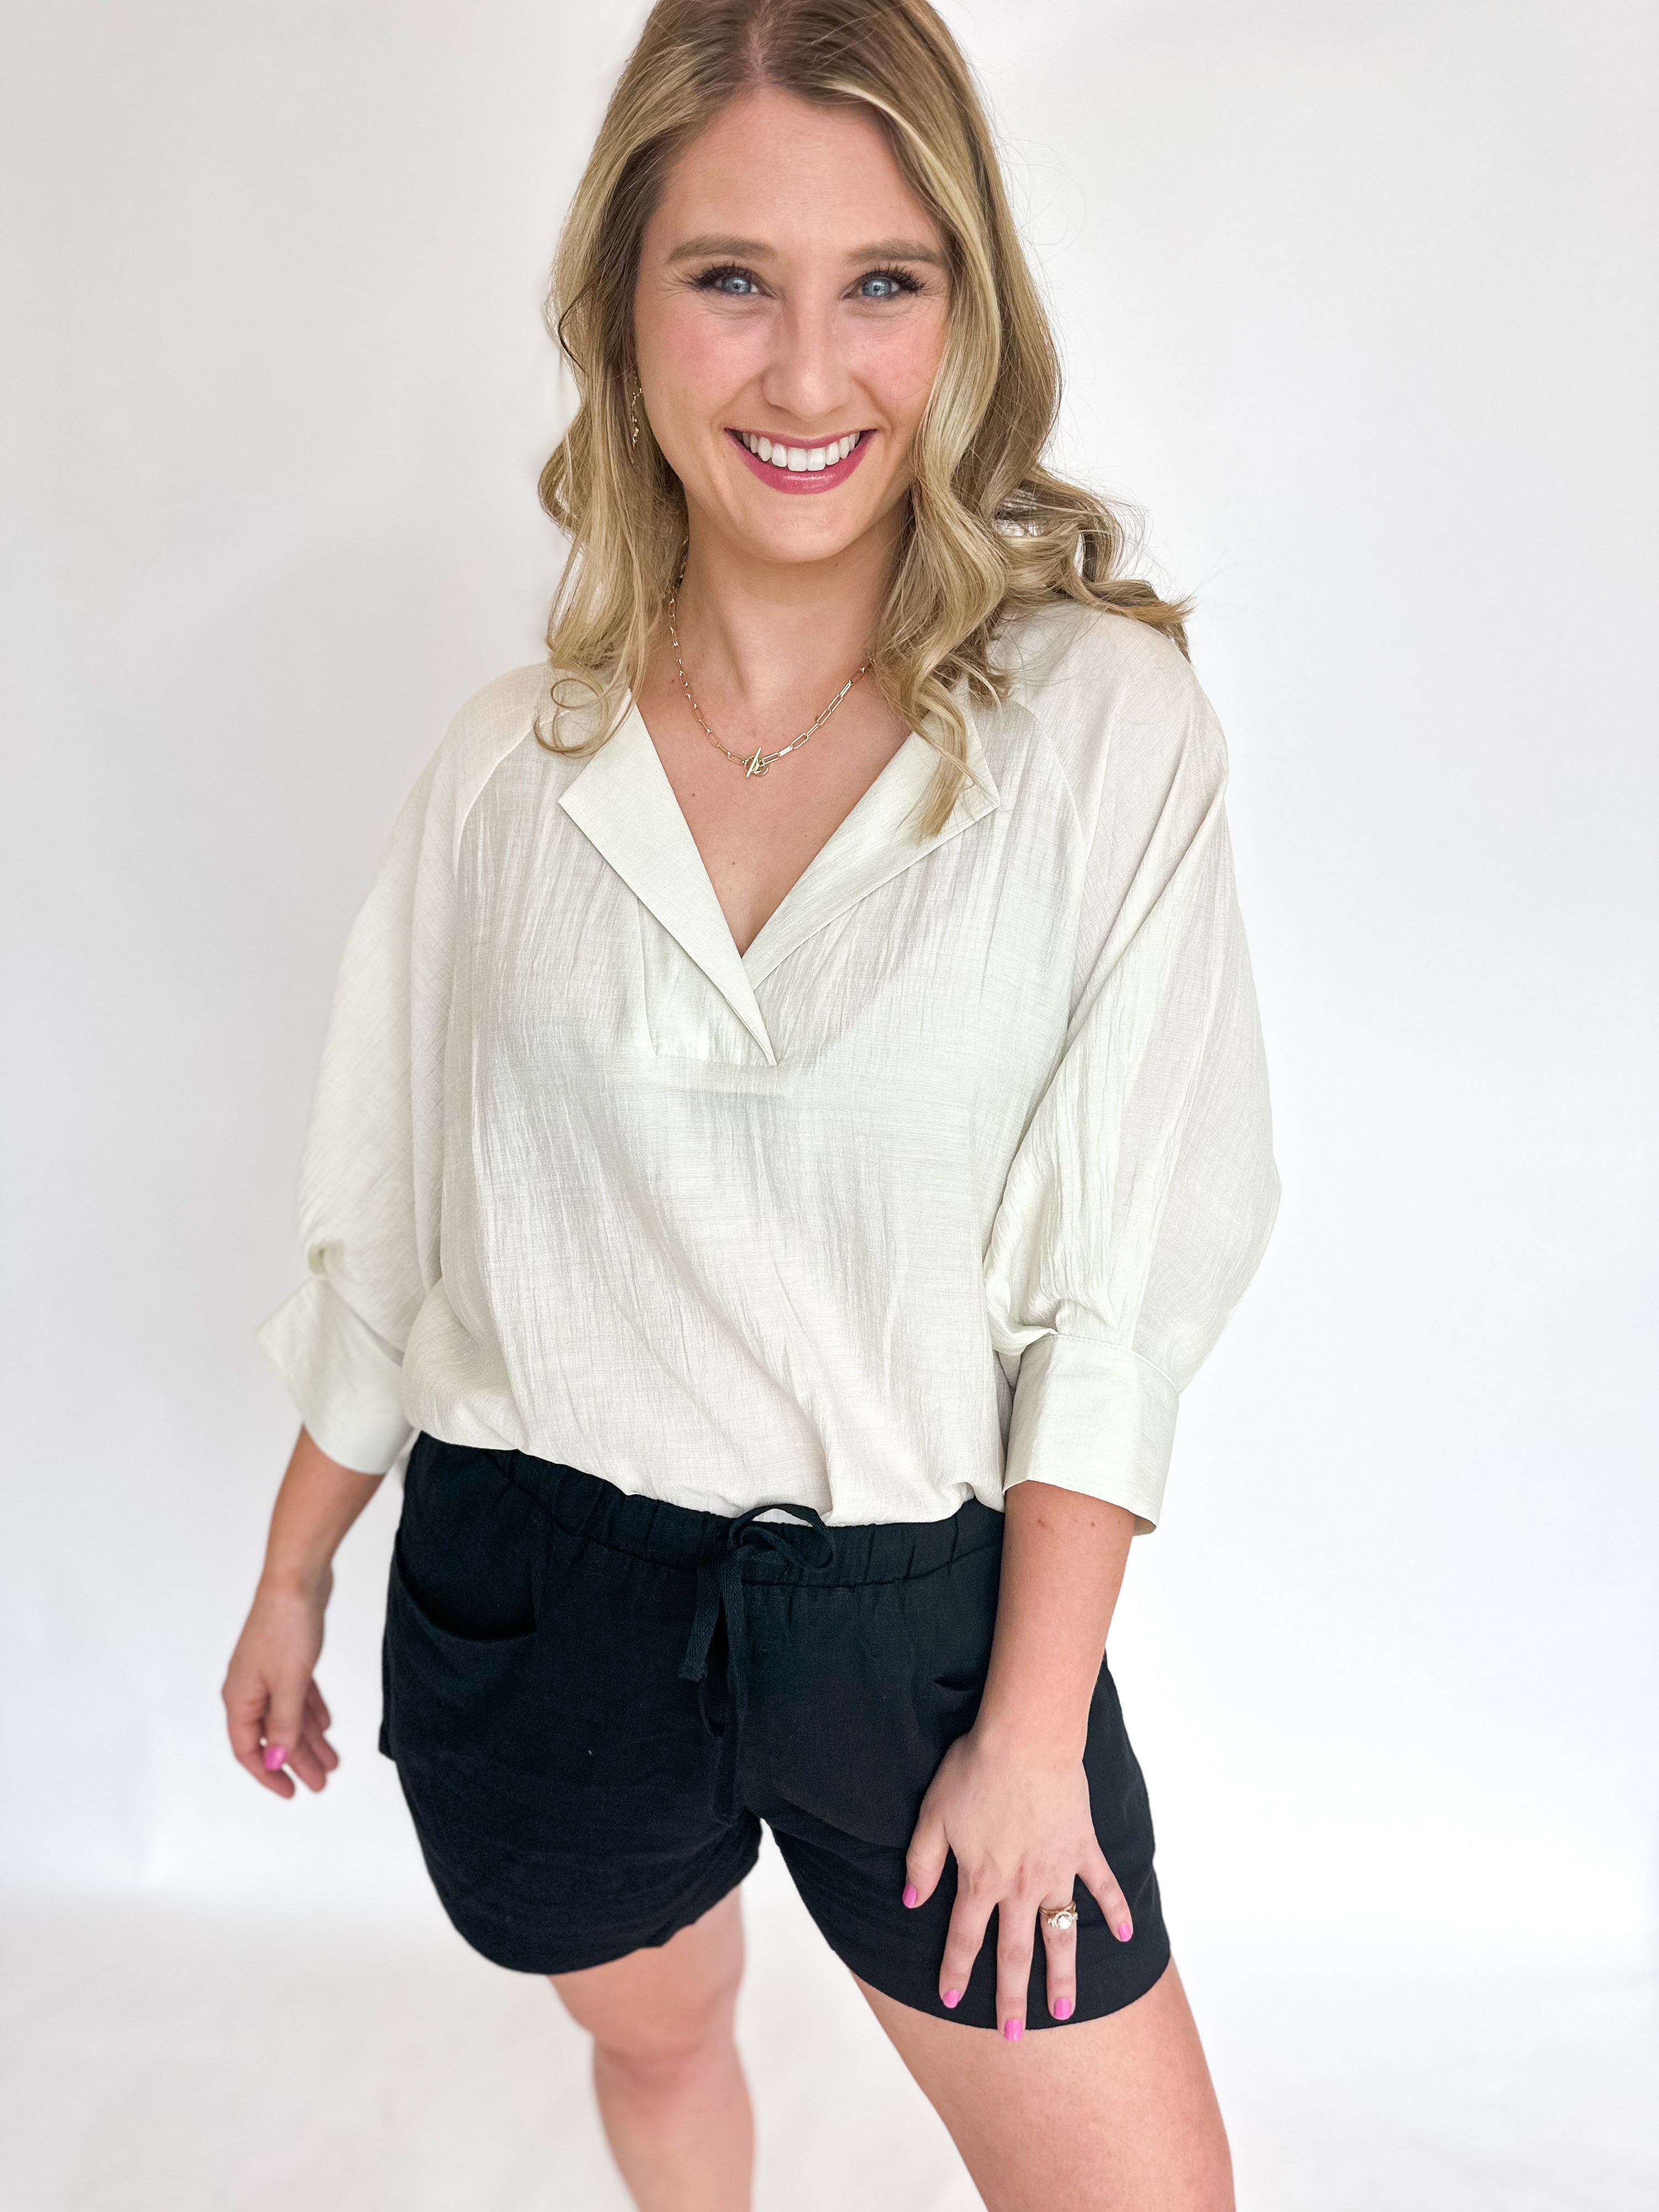 Oversized Collared Blouse - Linen-200 Fashion Blouses-ALLIE ROSE-July & June Women's Fashion Boutique Located in San Antonio, Texas